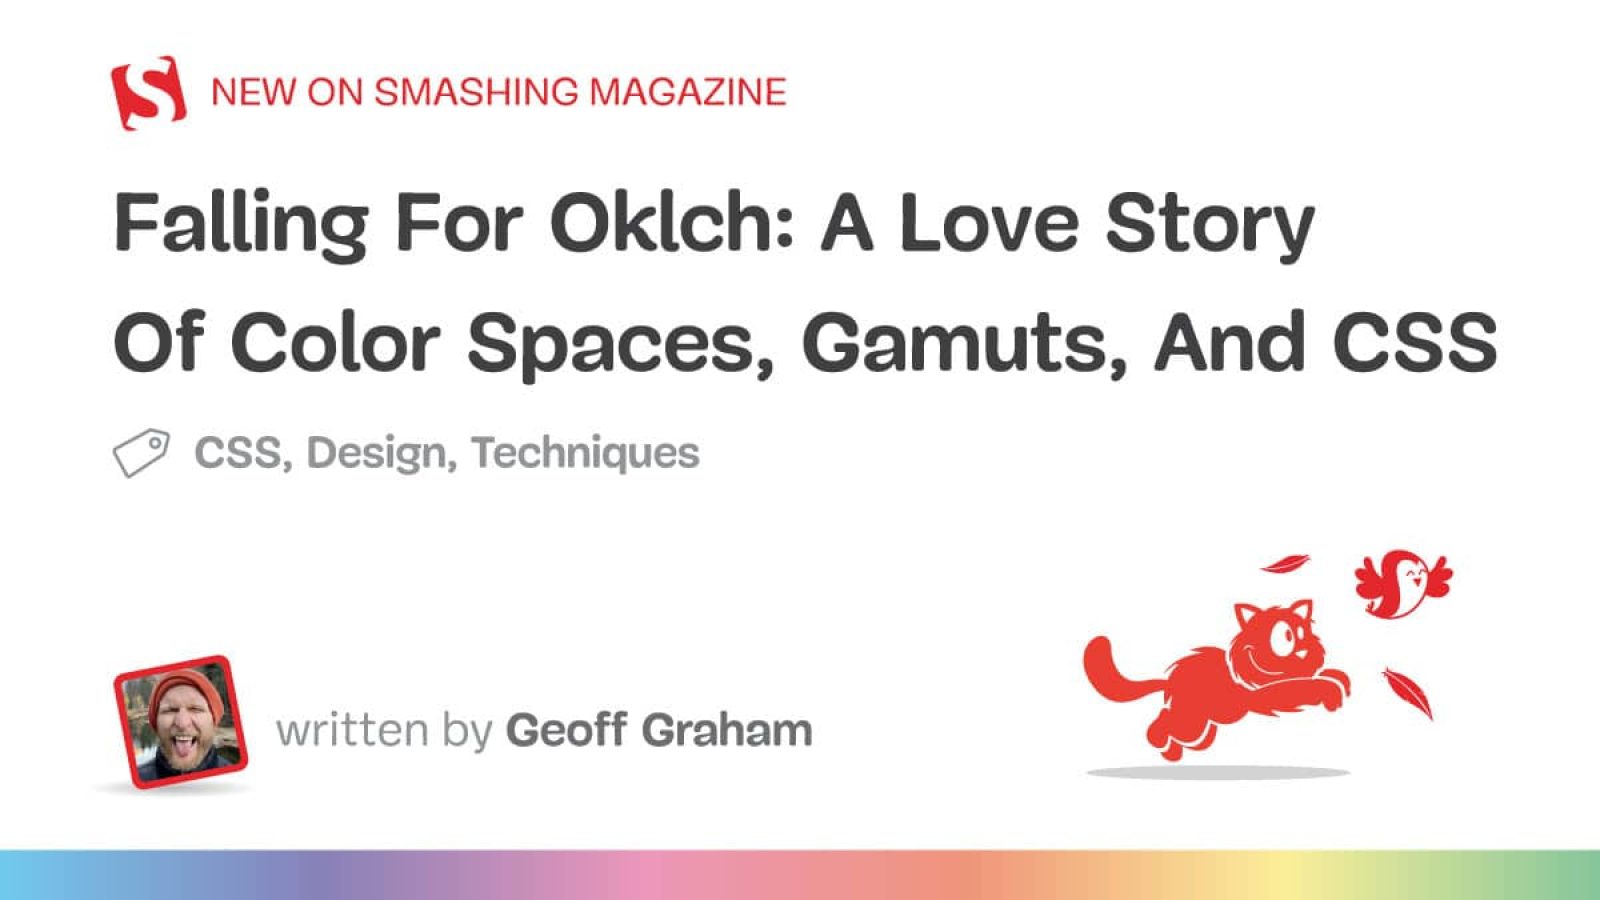 Falling For Oklch: A Love Story Of Shade Areas, Gamuts, And CSS